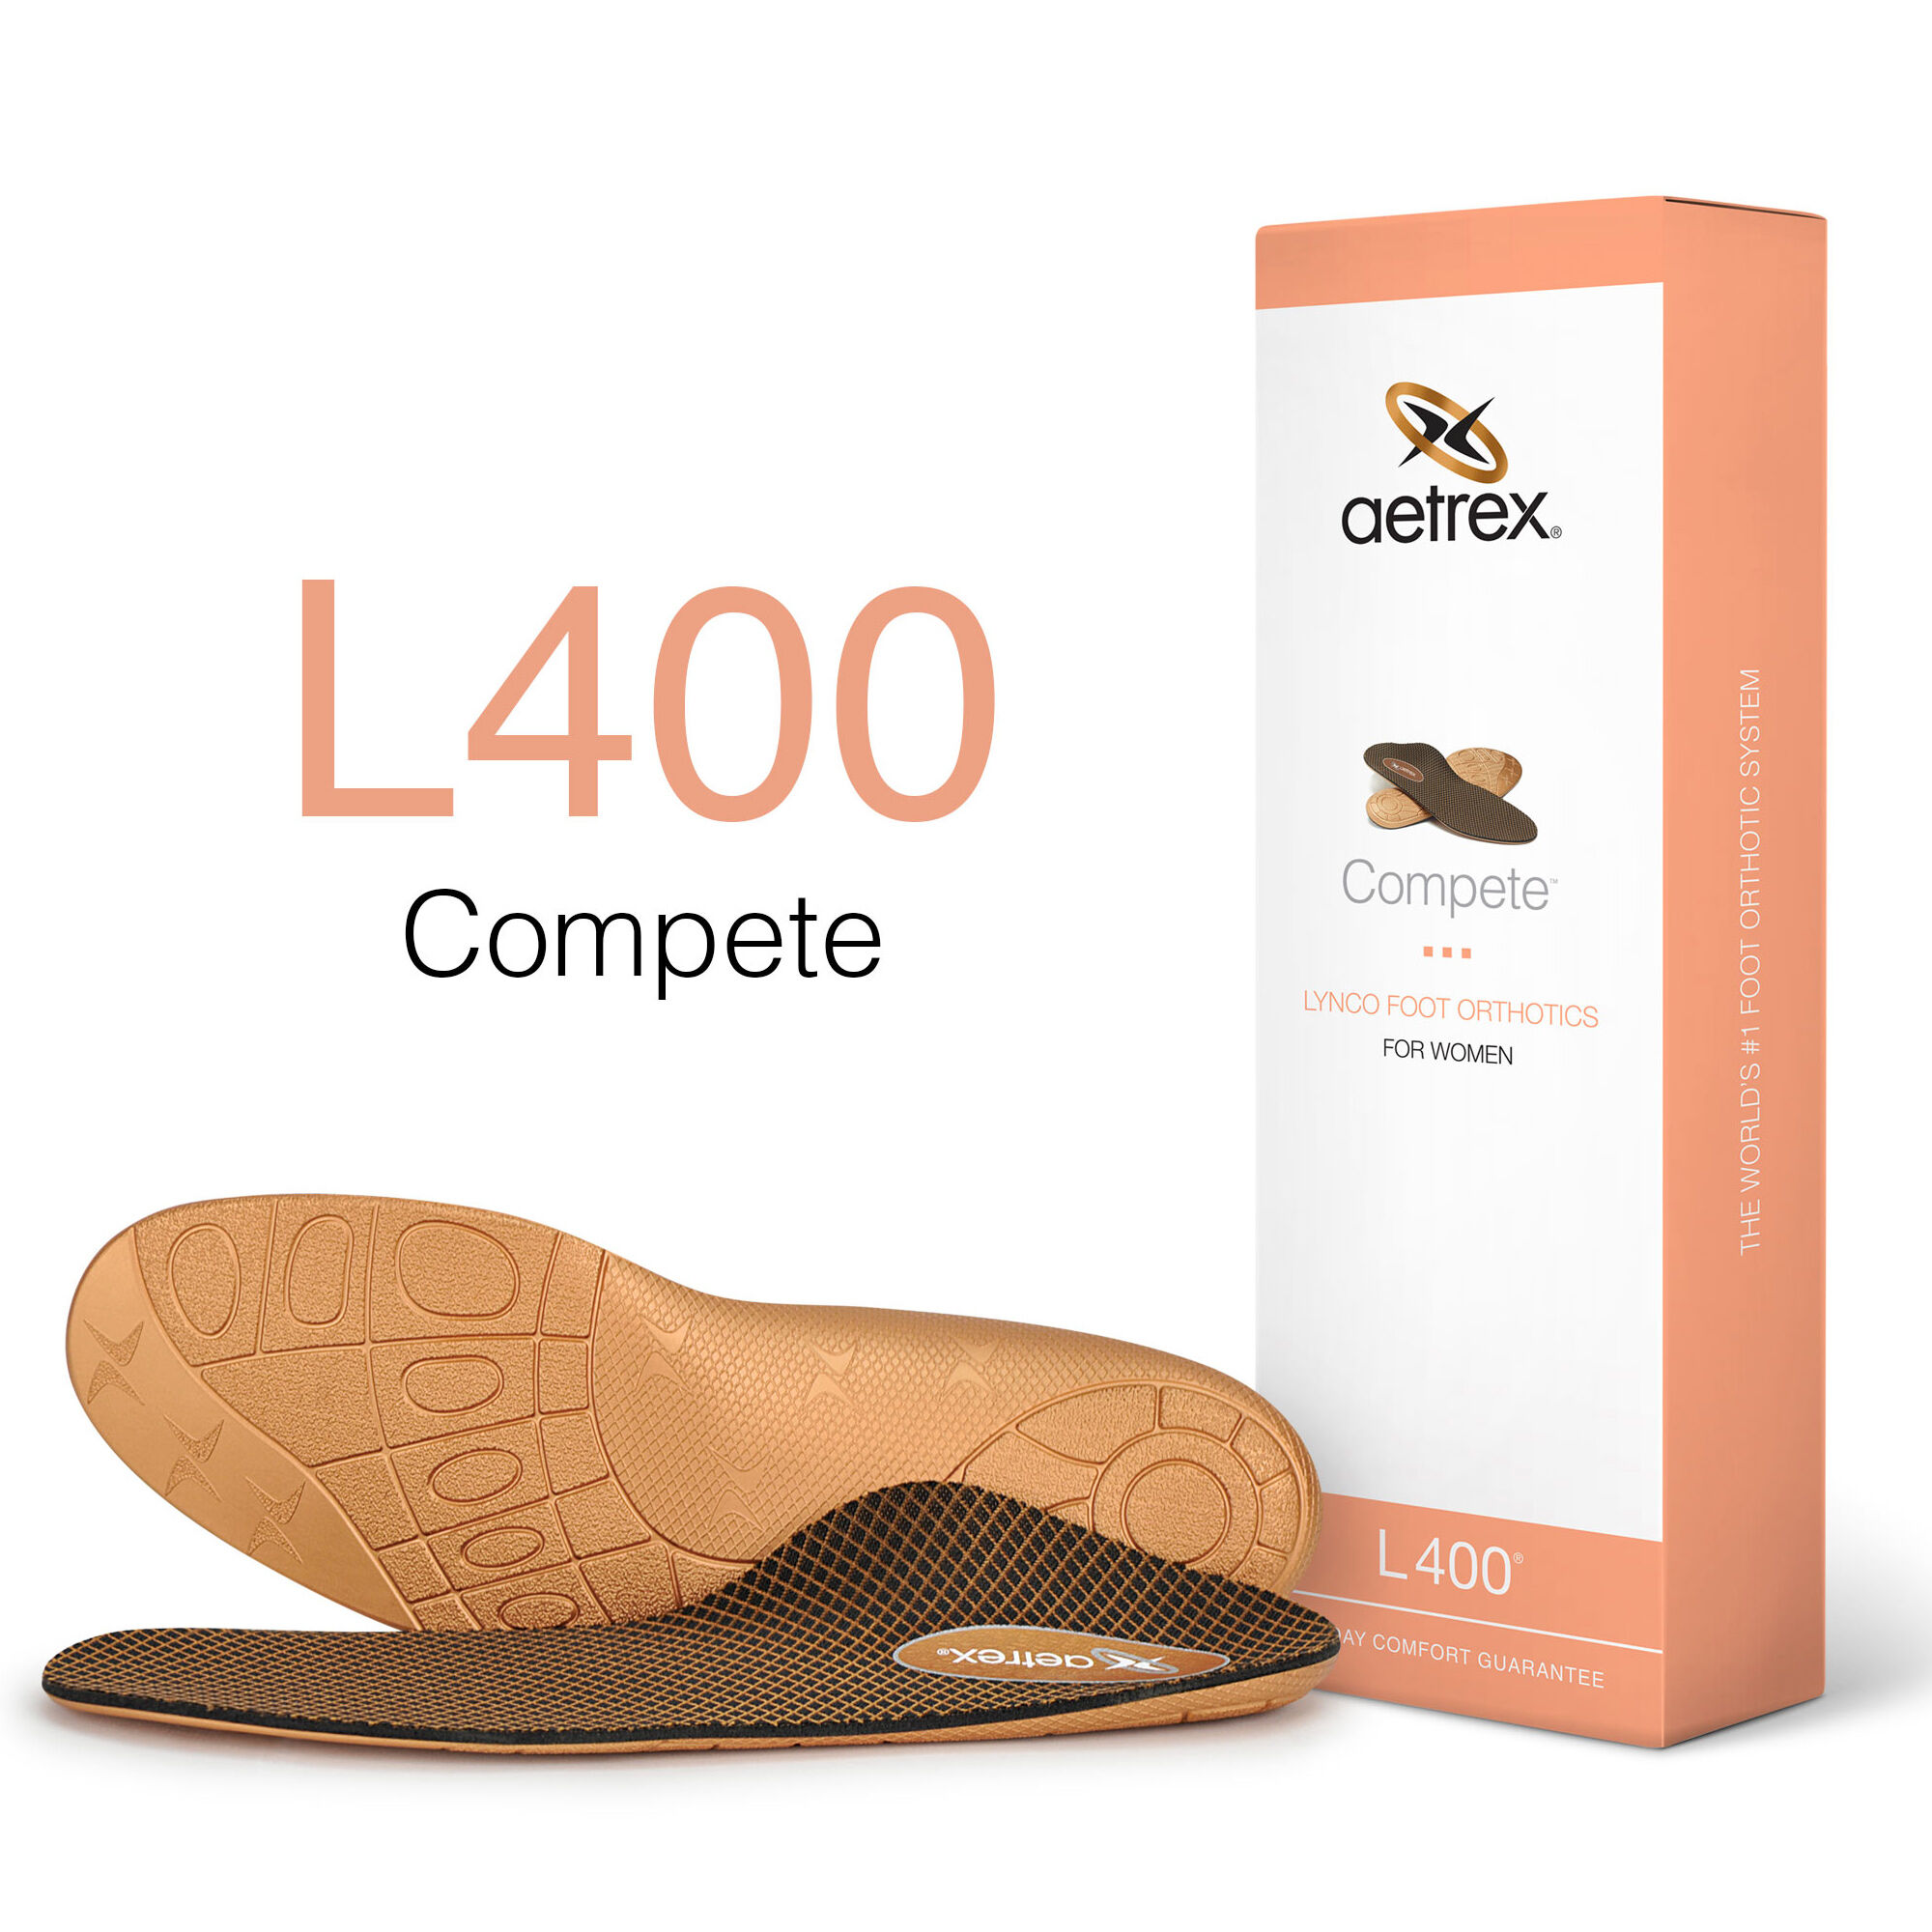 Women's Sport/Compete - Insoles for 